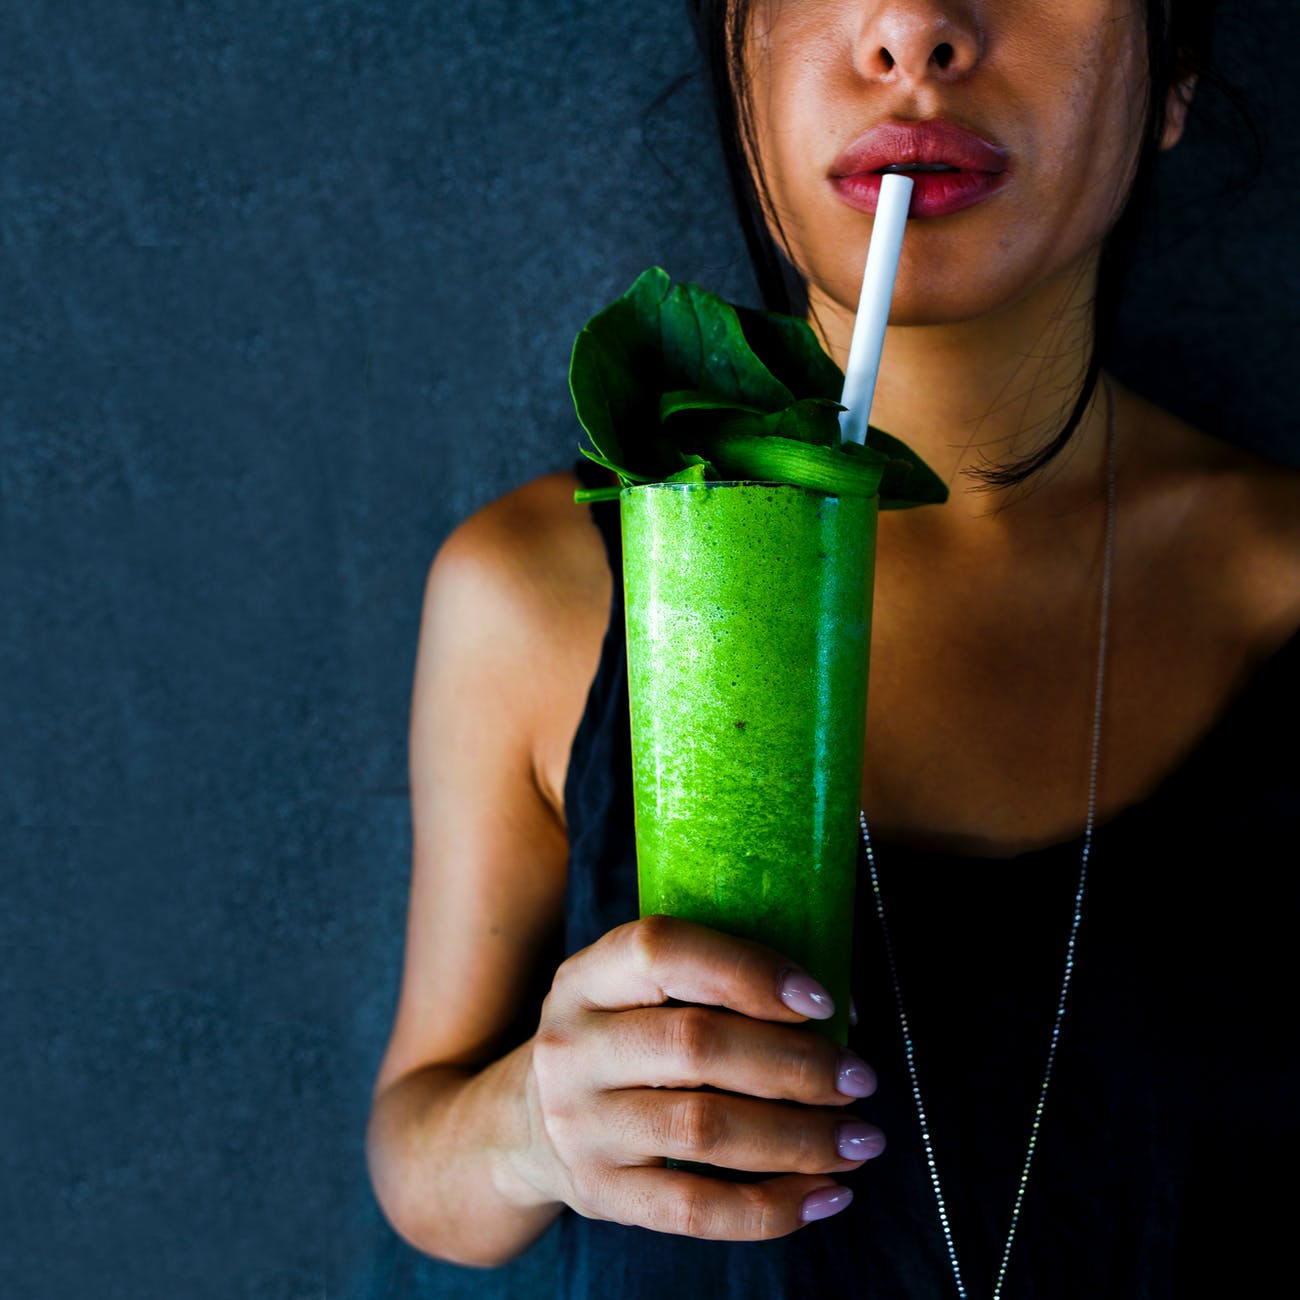 pexels photo 6853406 - Kale and Spinach Smoothie Recipe [Immune Booster Smoothie]